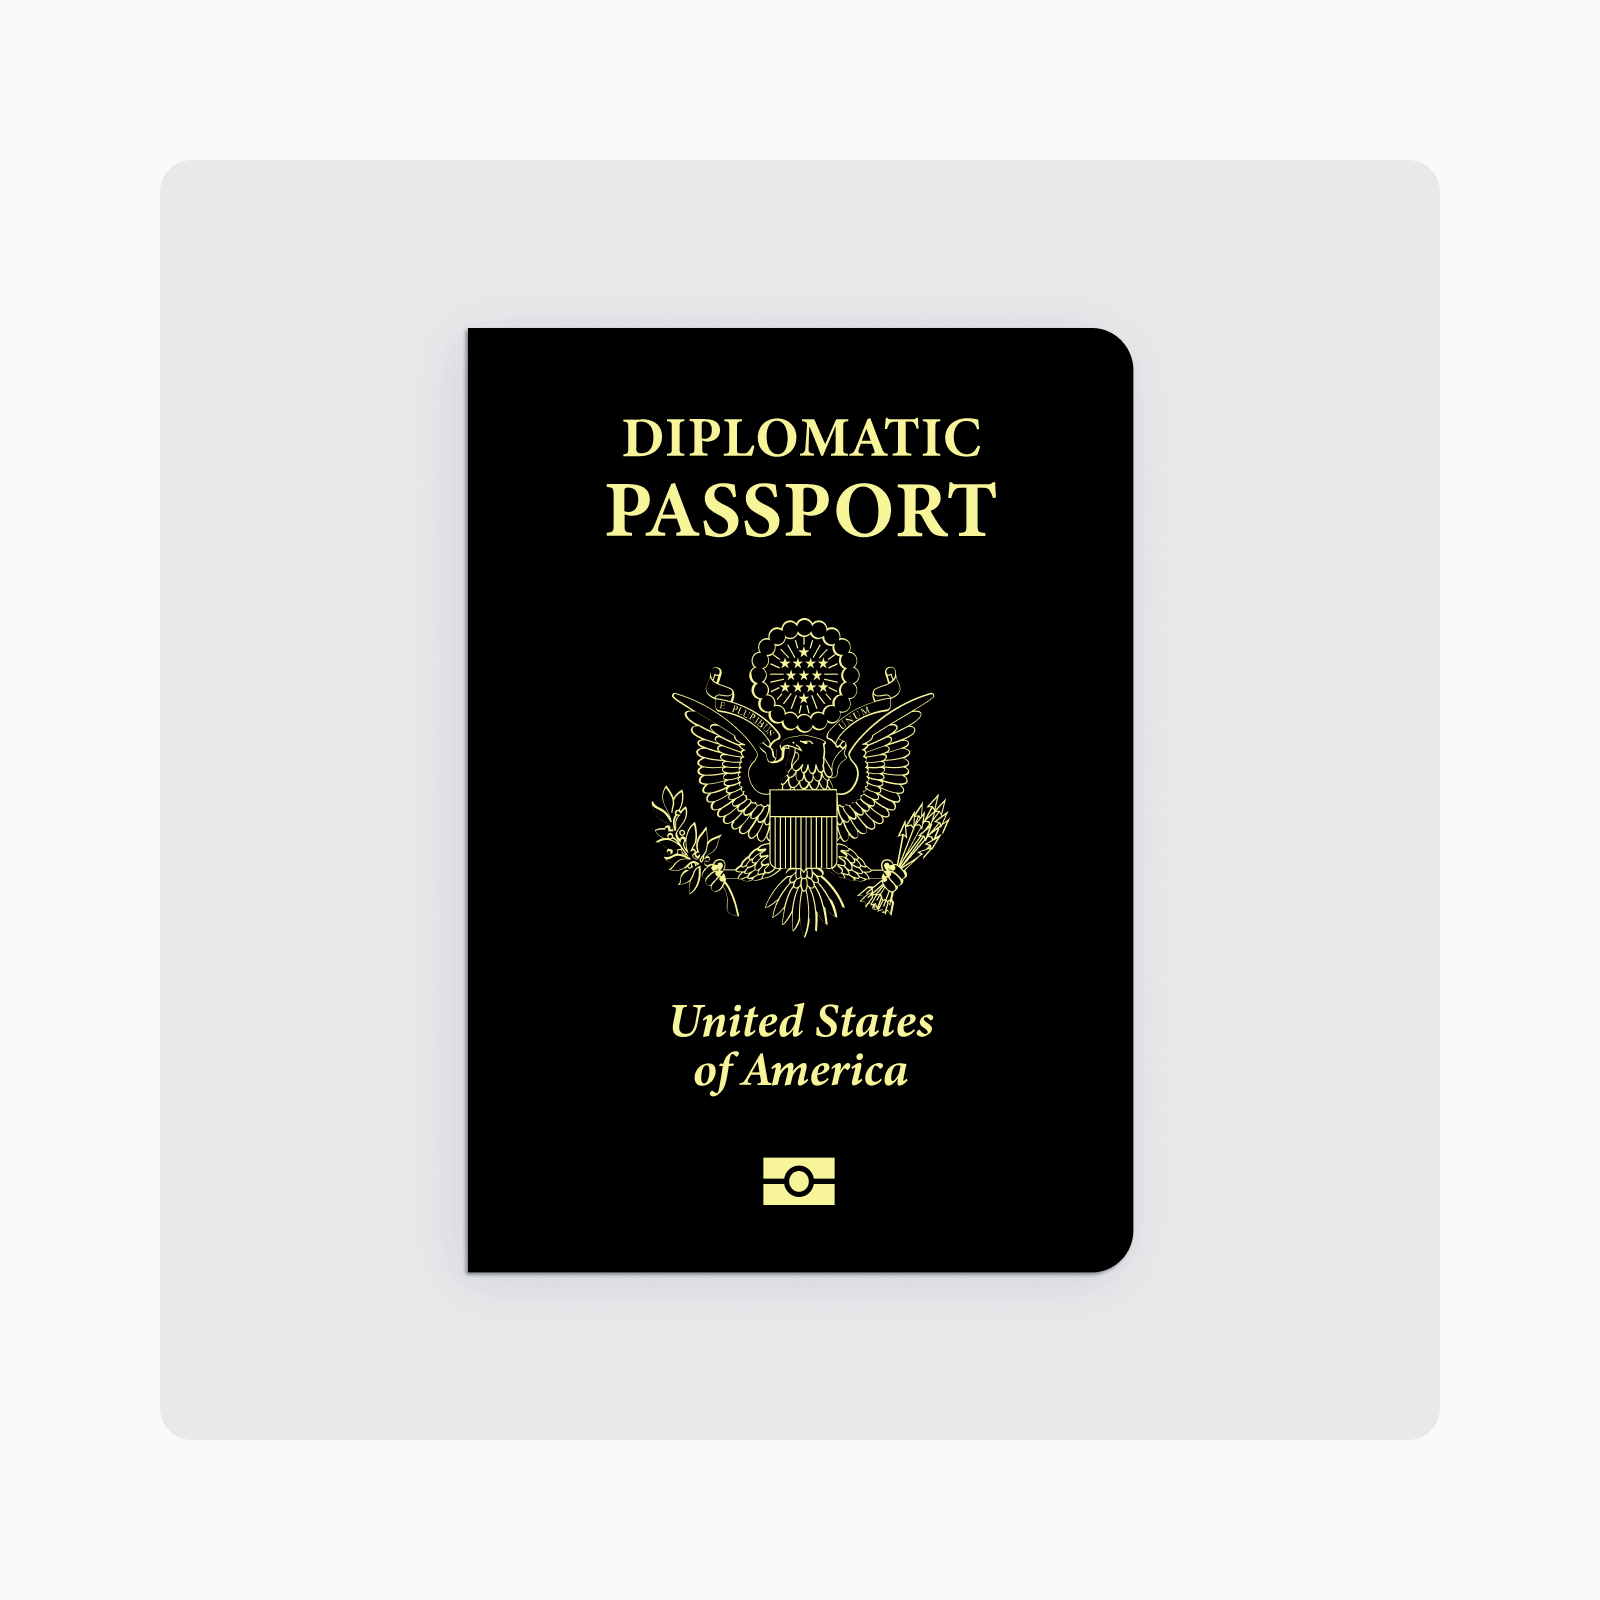 a black-covered diplomatic passport for the United States.